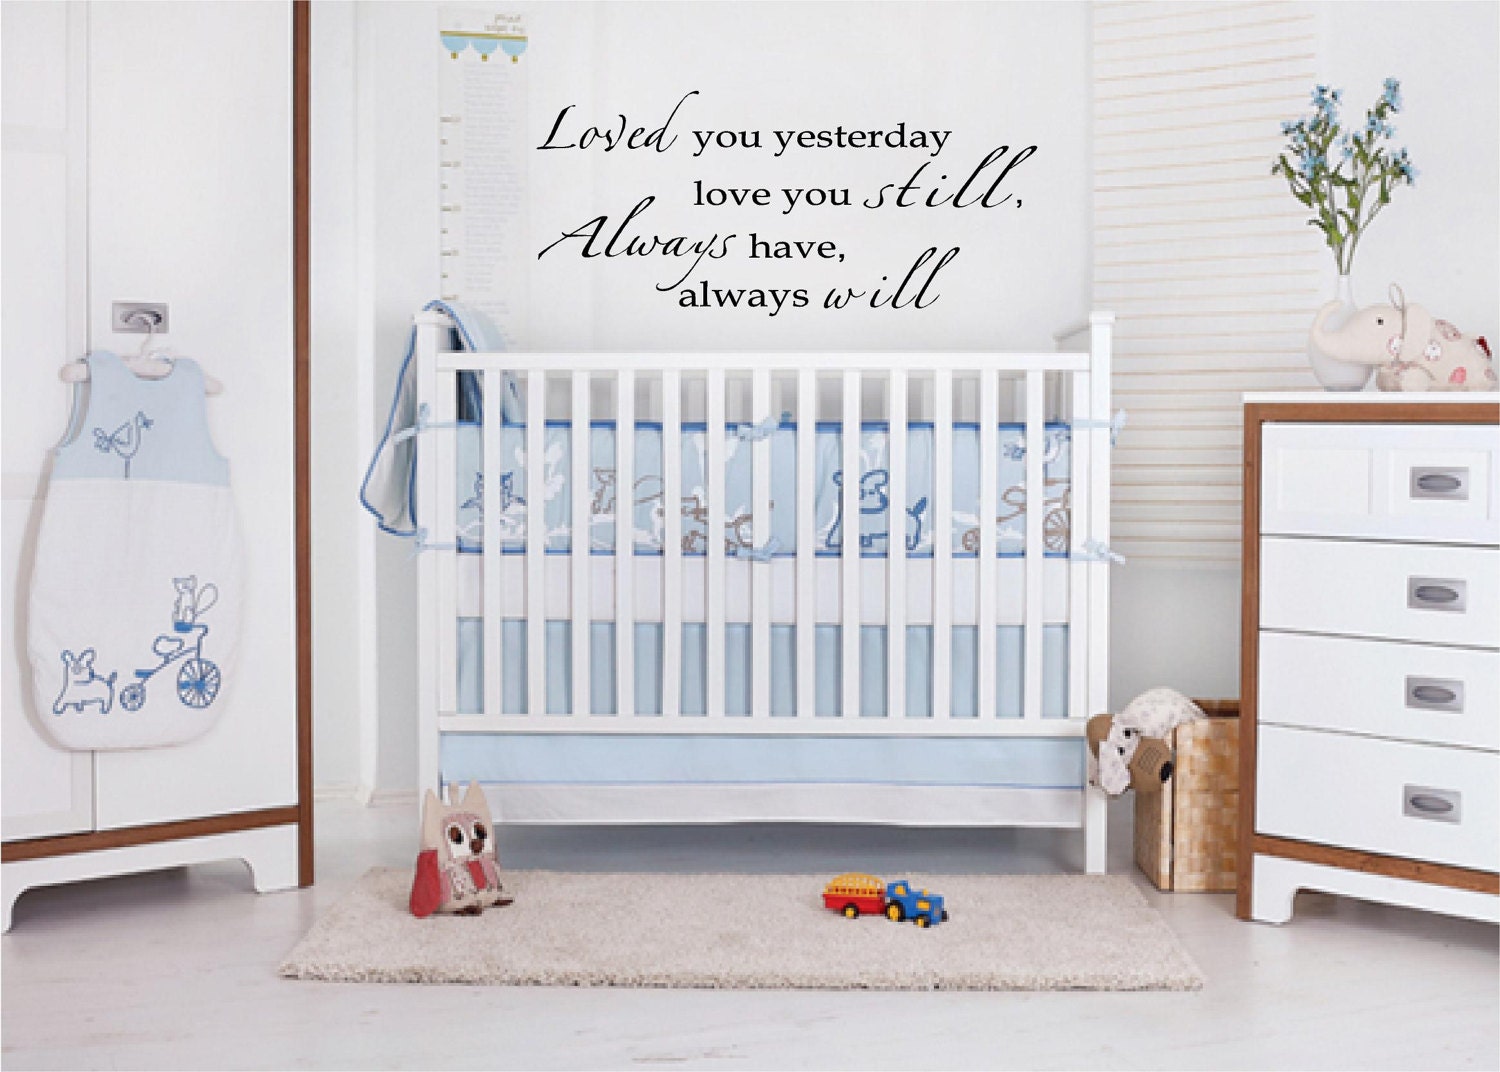 Loved You Yesterday Loved You Still Wall Quotes Inspirational Quote Love Sayings Phrases Children s Decals Nursery Decor